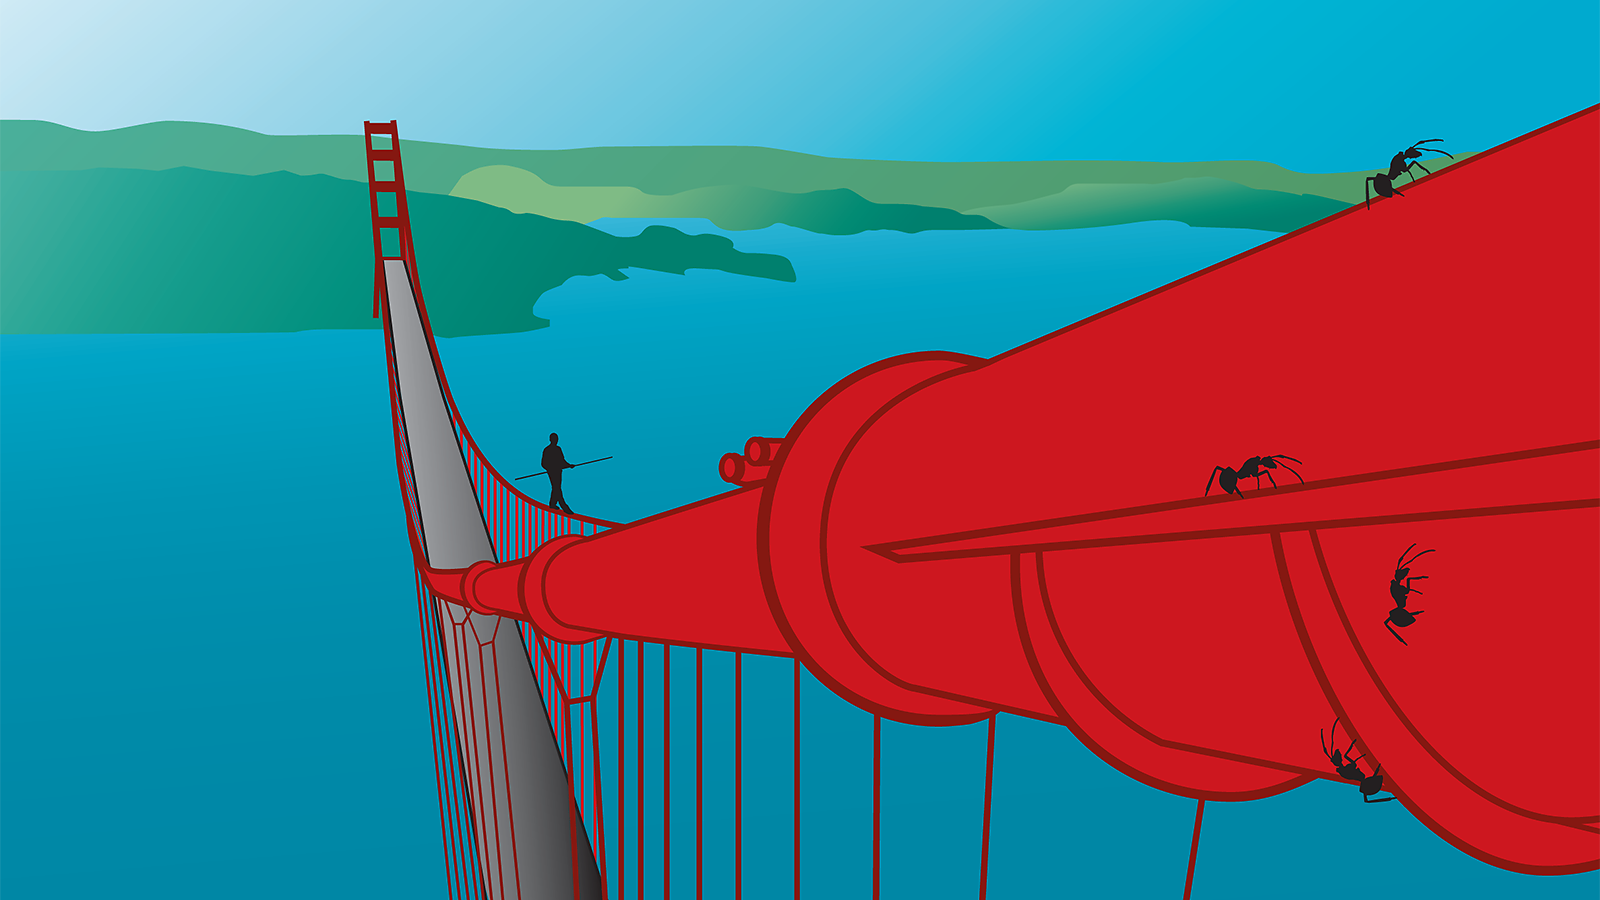 Illustration of a man tightrope walking the Golden Gate Bridge and ants walking around the cable